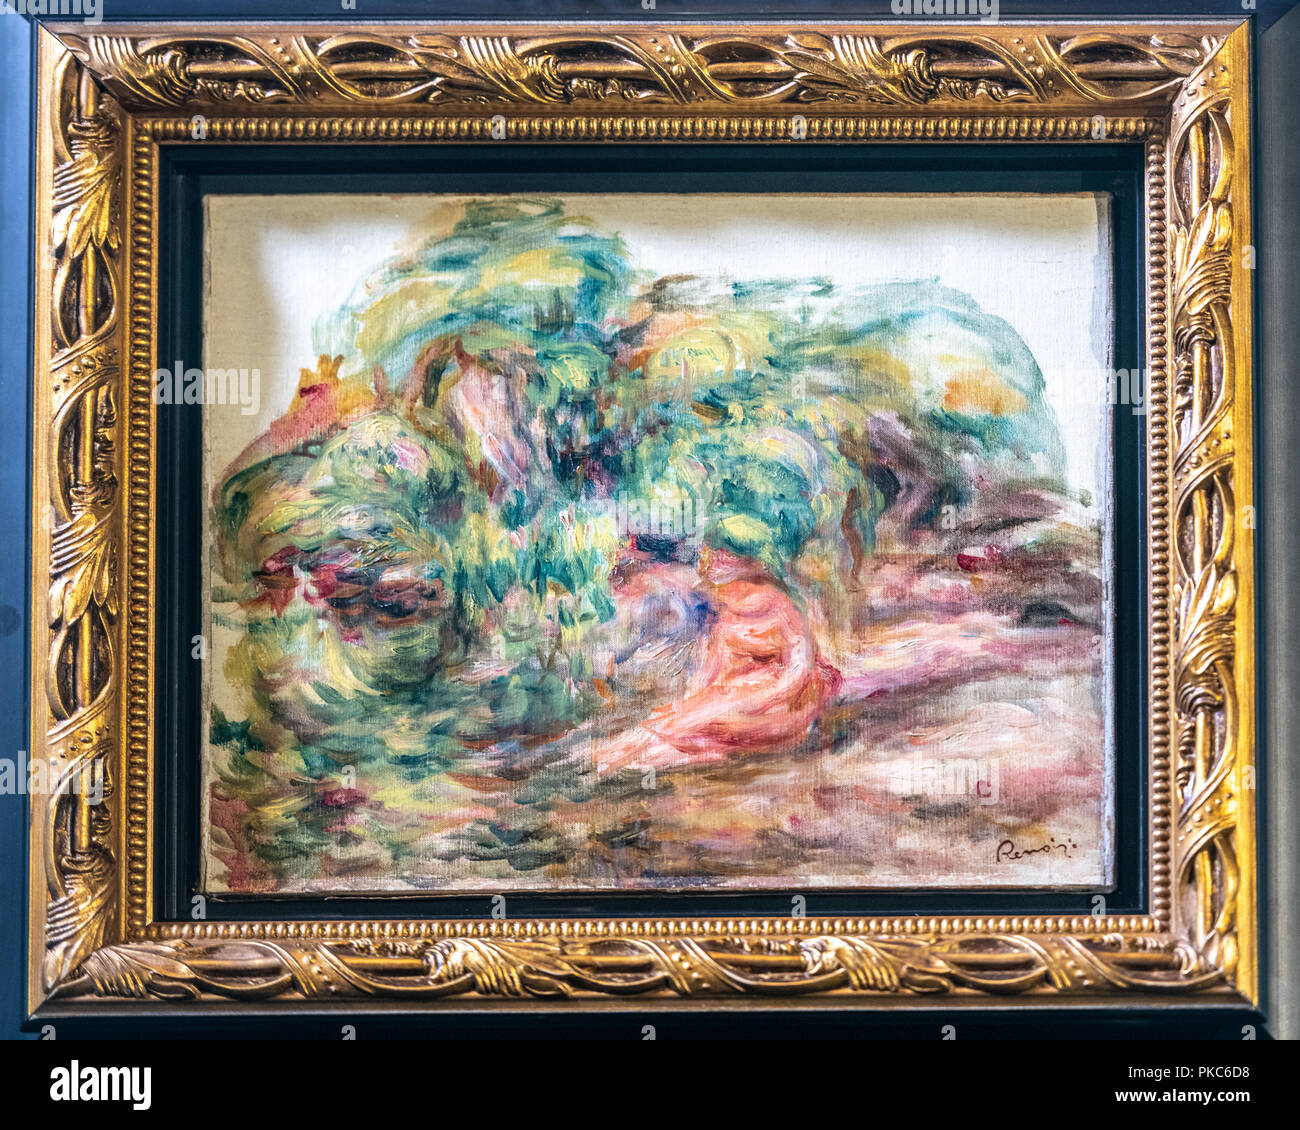 New York, USA,  12 September 2018. The painting "Deux Femmes Dans Un Jardin" by French impressionist Pierre-Auguste Renoir is exhibited during a ceremony to return the painting, stolen by the Nazis in World War II from the Sulitzer's family in Paris, at the Jewish Heritage Museum in New York City.  Credit: Enrique Shore Credit: Enrique Shore/Alamy Live News Stock Photo